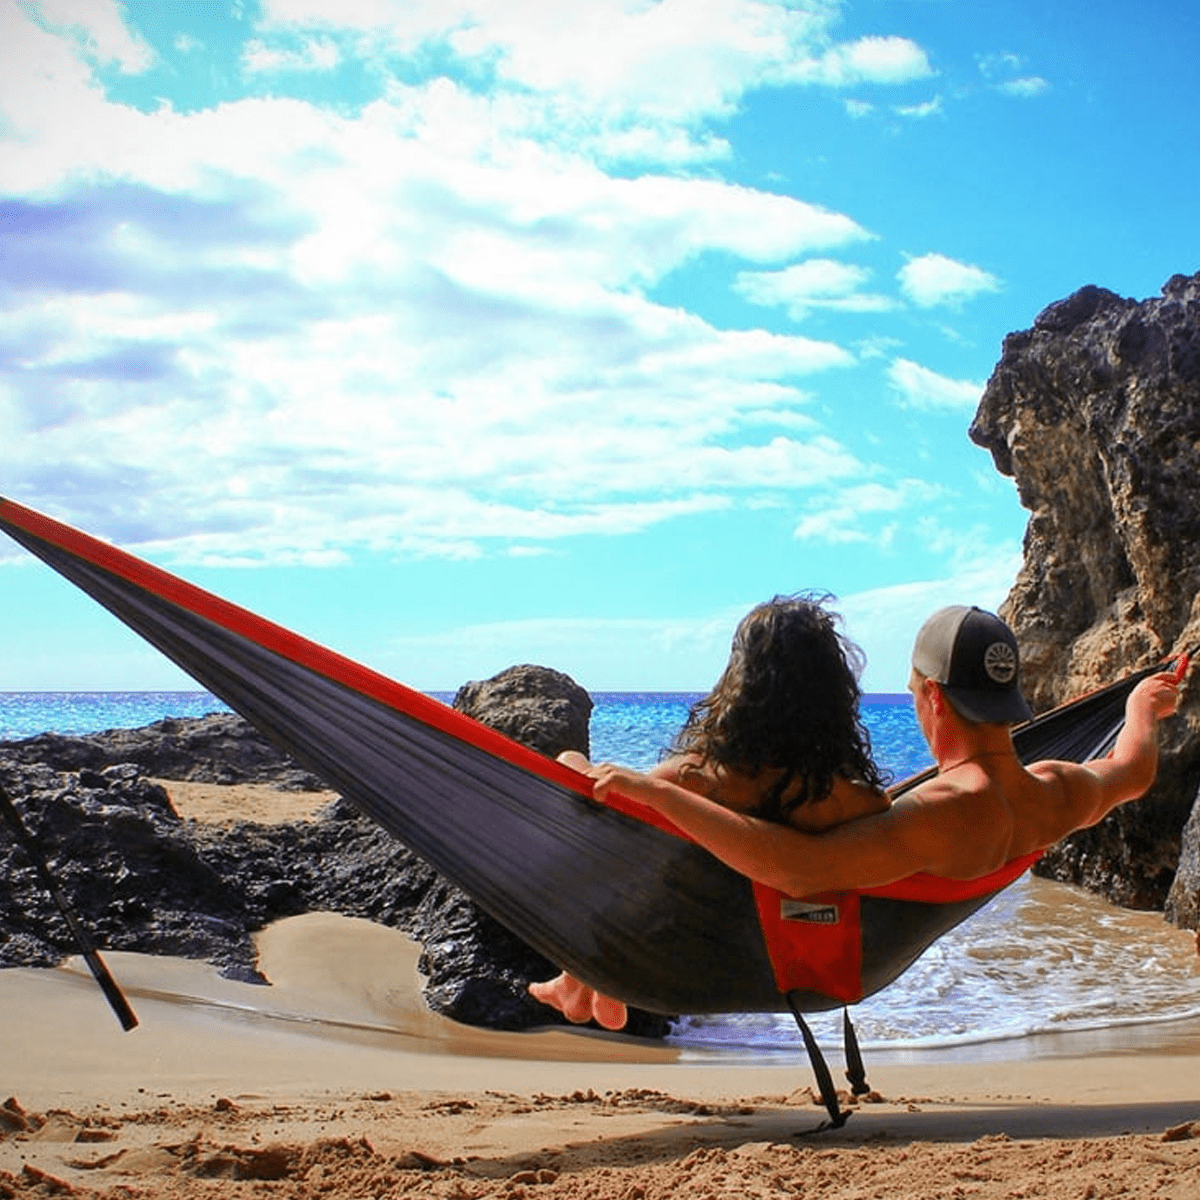 ENO Double Nest Hammock (Red-Charcoal)